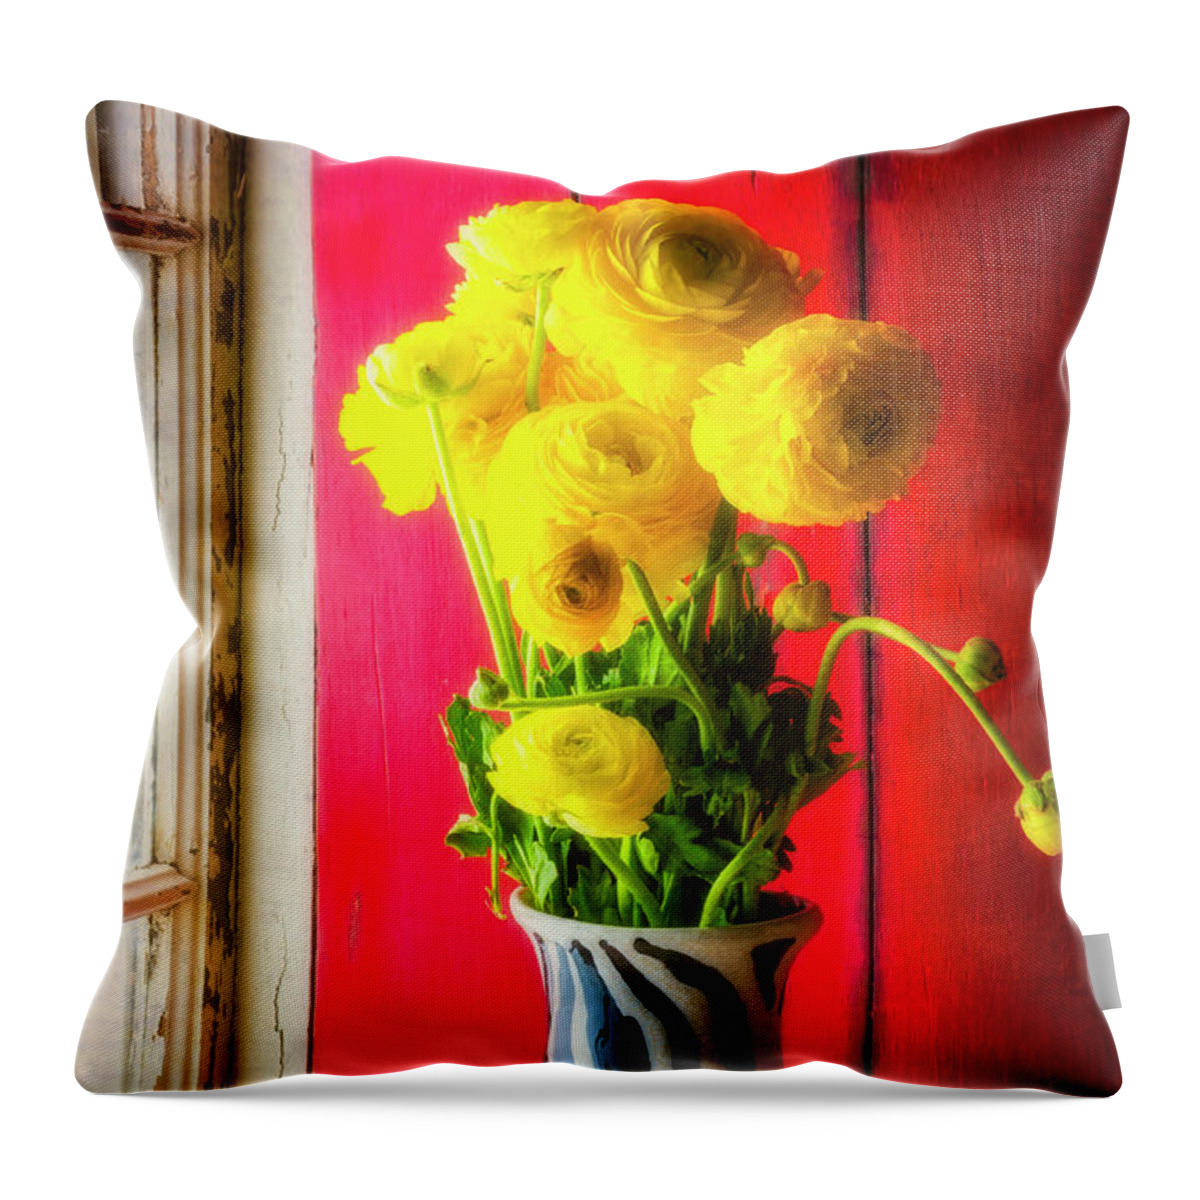 Yellow Throw Pillow featuring the photograph Ranunculus In Vase In Window by Garry Gay